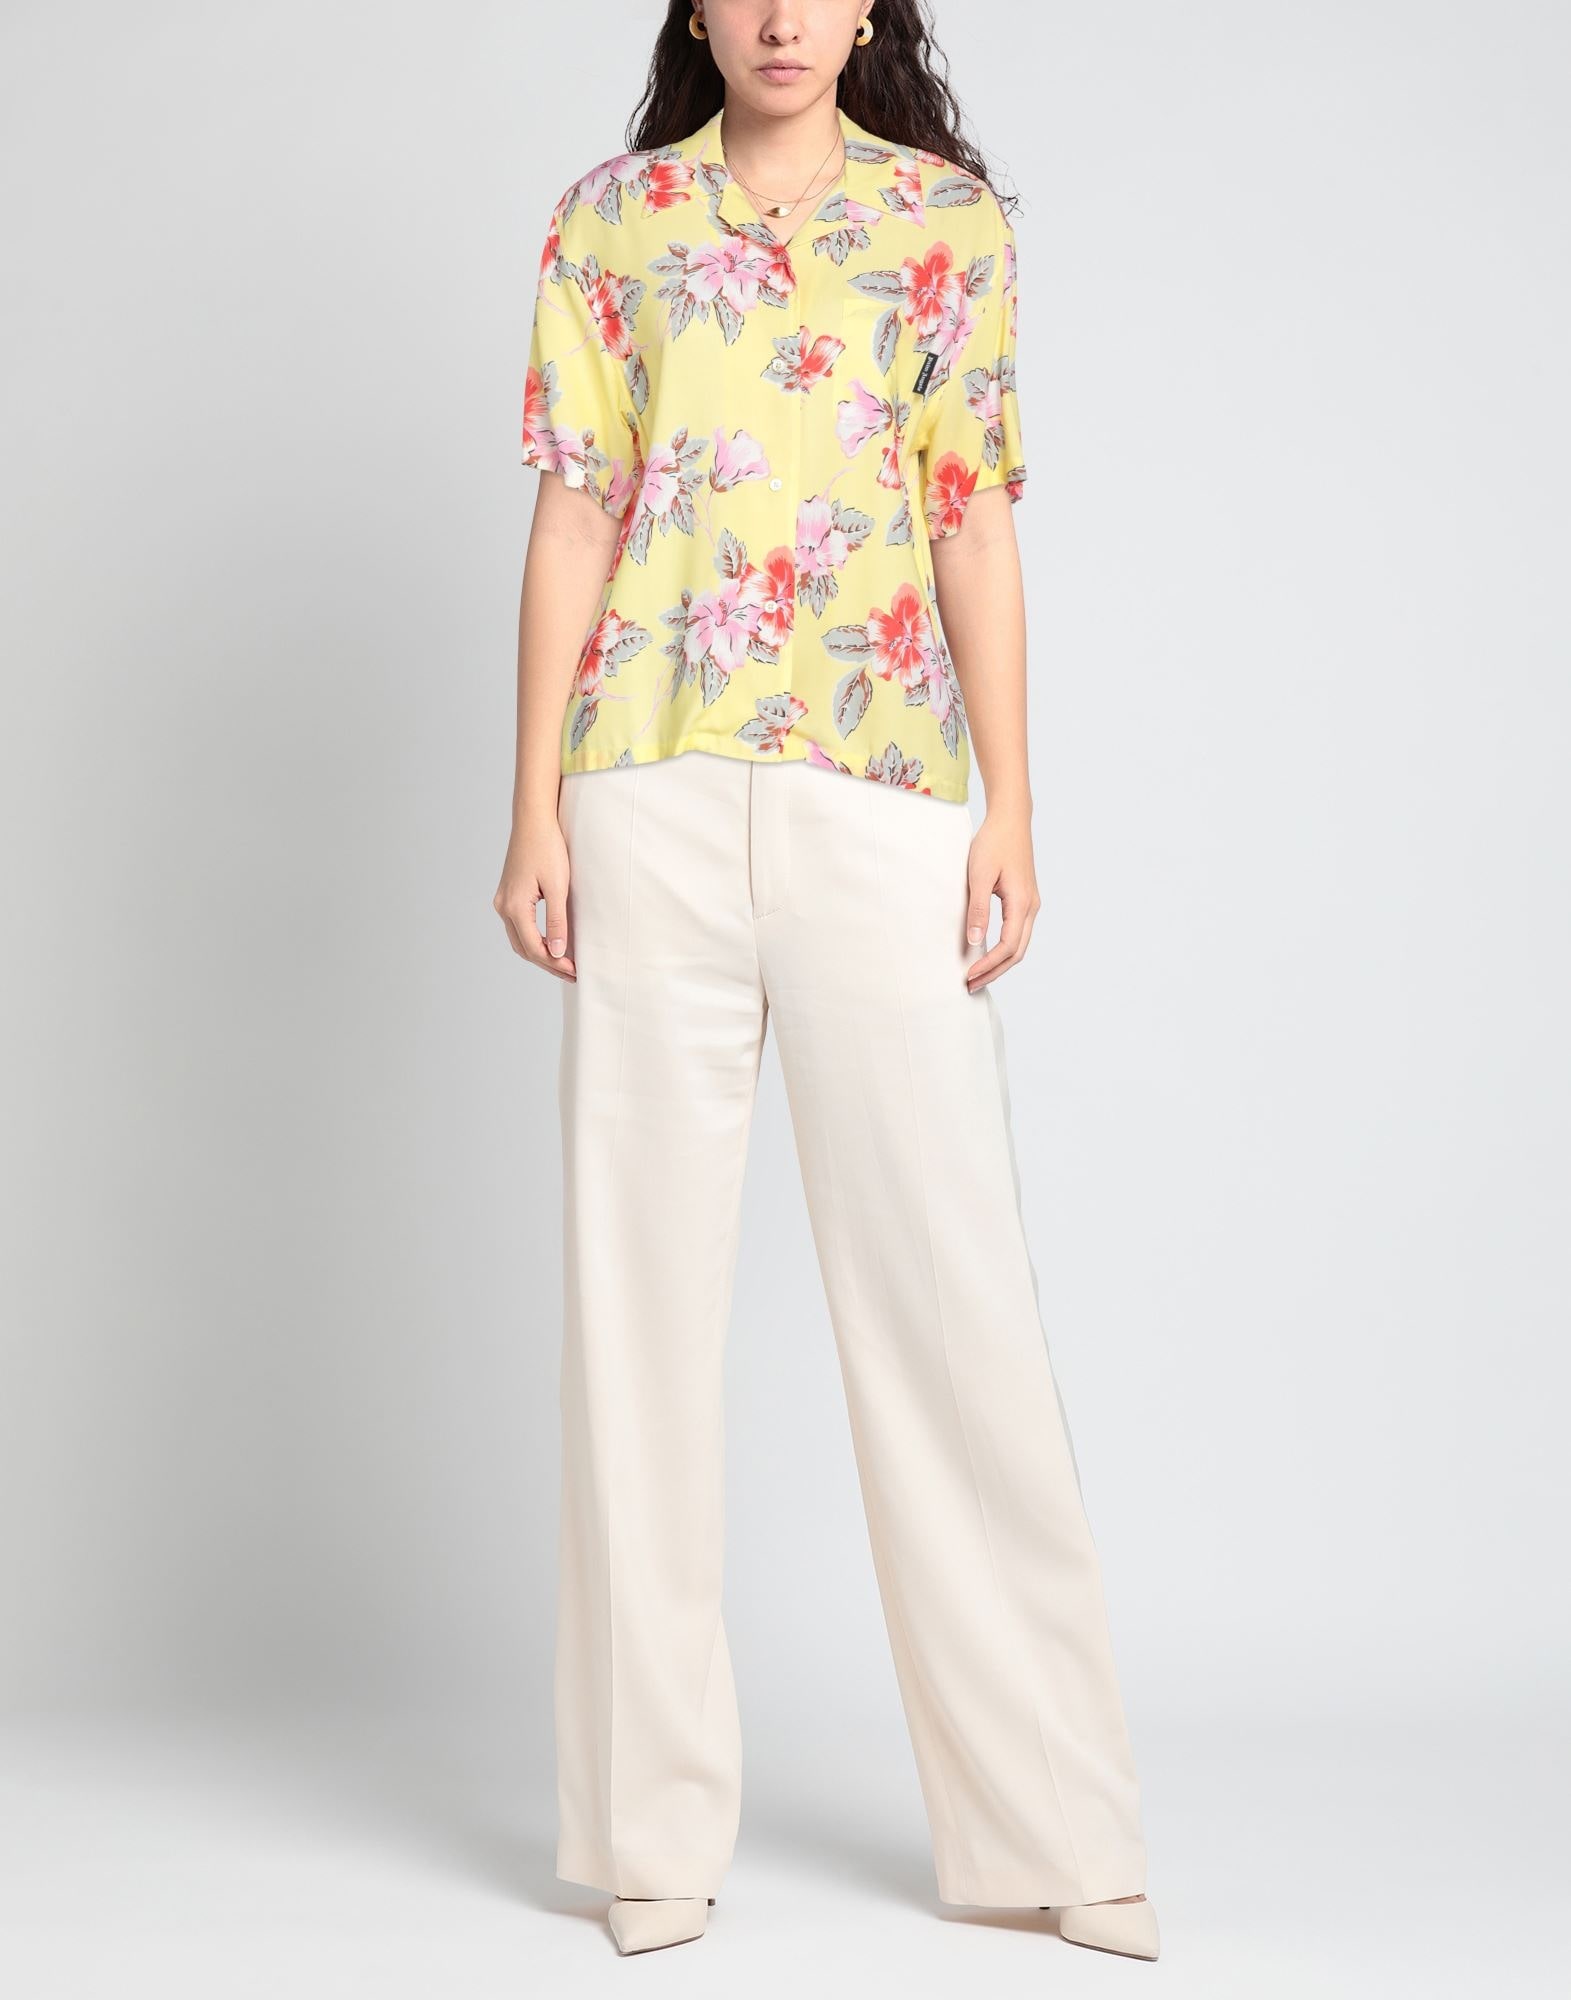 Yellow Women's Floral Shirts & Blouses - 2